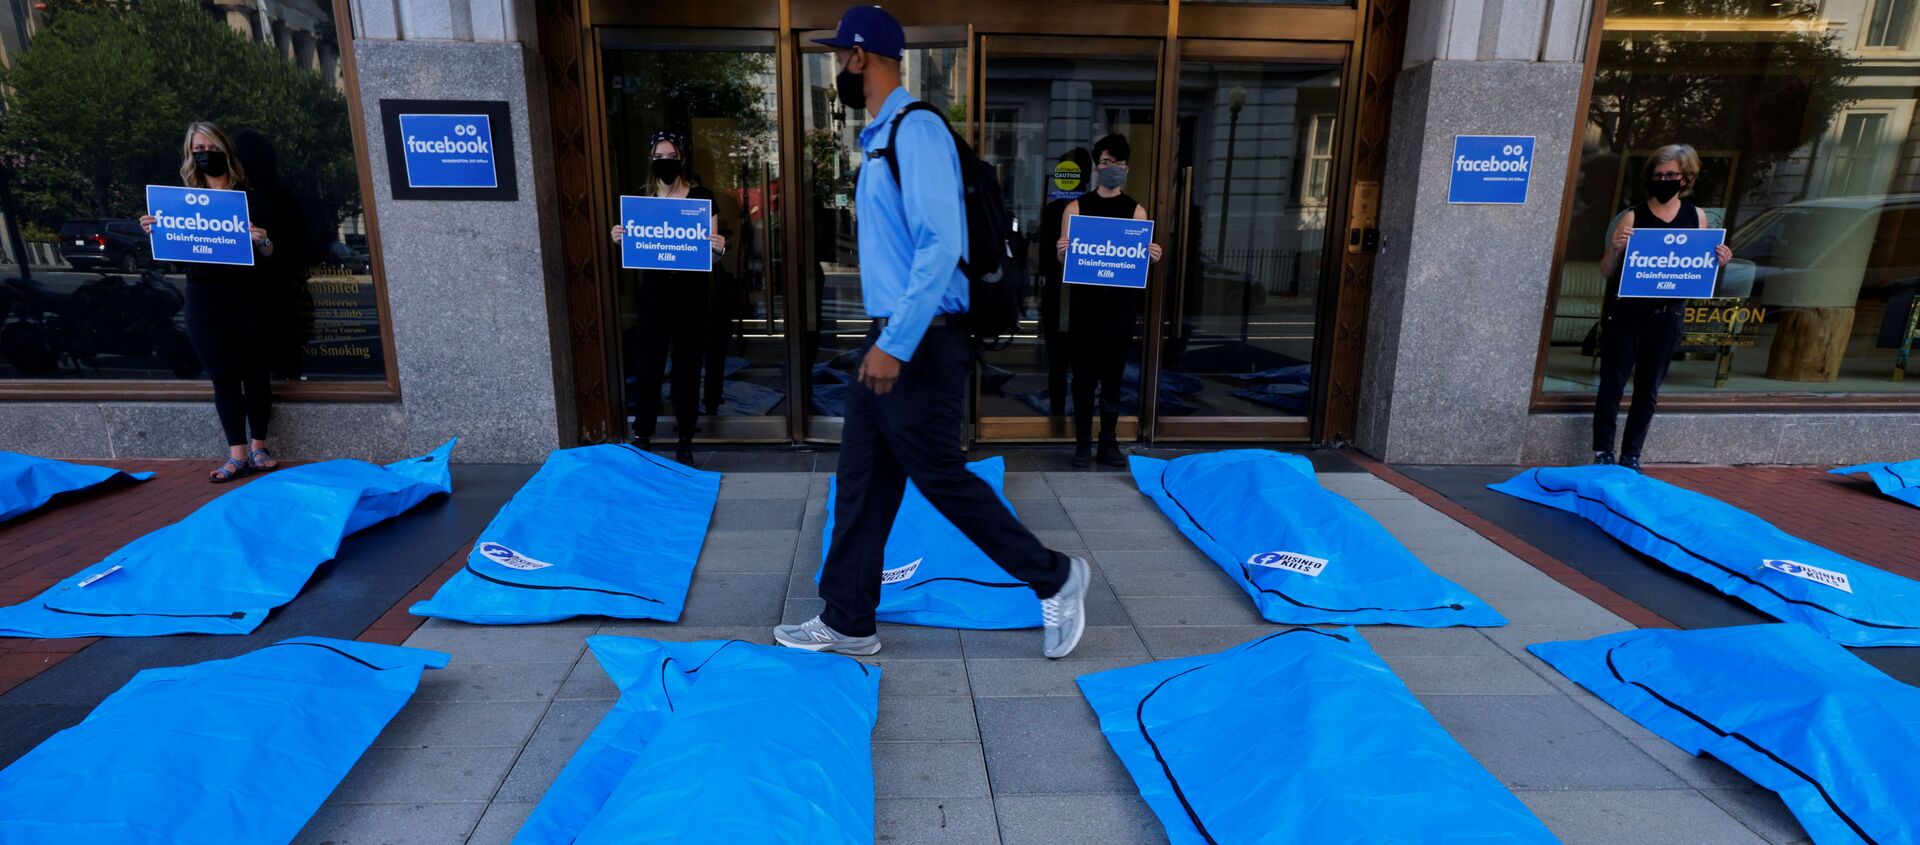 A pedestrian walks through an art installation of body bags as demonstrators protest against Facebook and what they claim is disinformation regarding coronavirus disease (COVID-19) on the social media giant's platform, outside Facebook headquarters in Washington, U.S., July 28, 2021 - Sputnik International, 1920, 29.07.2021